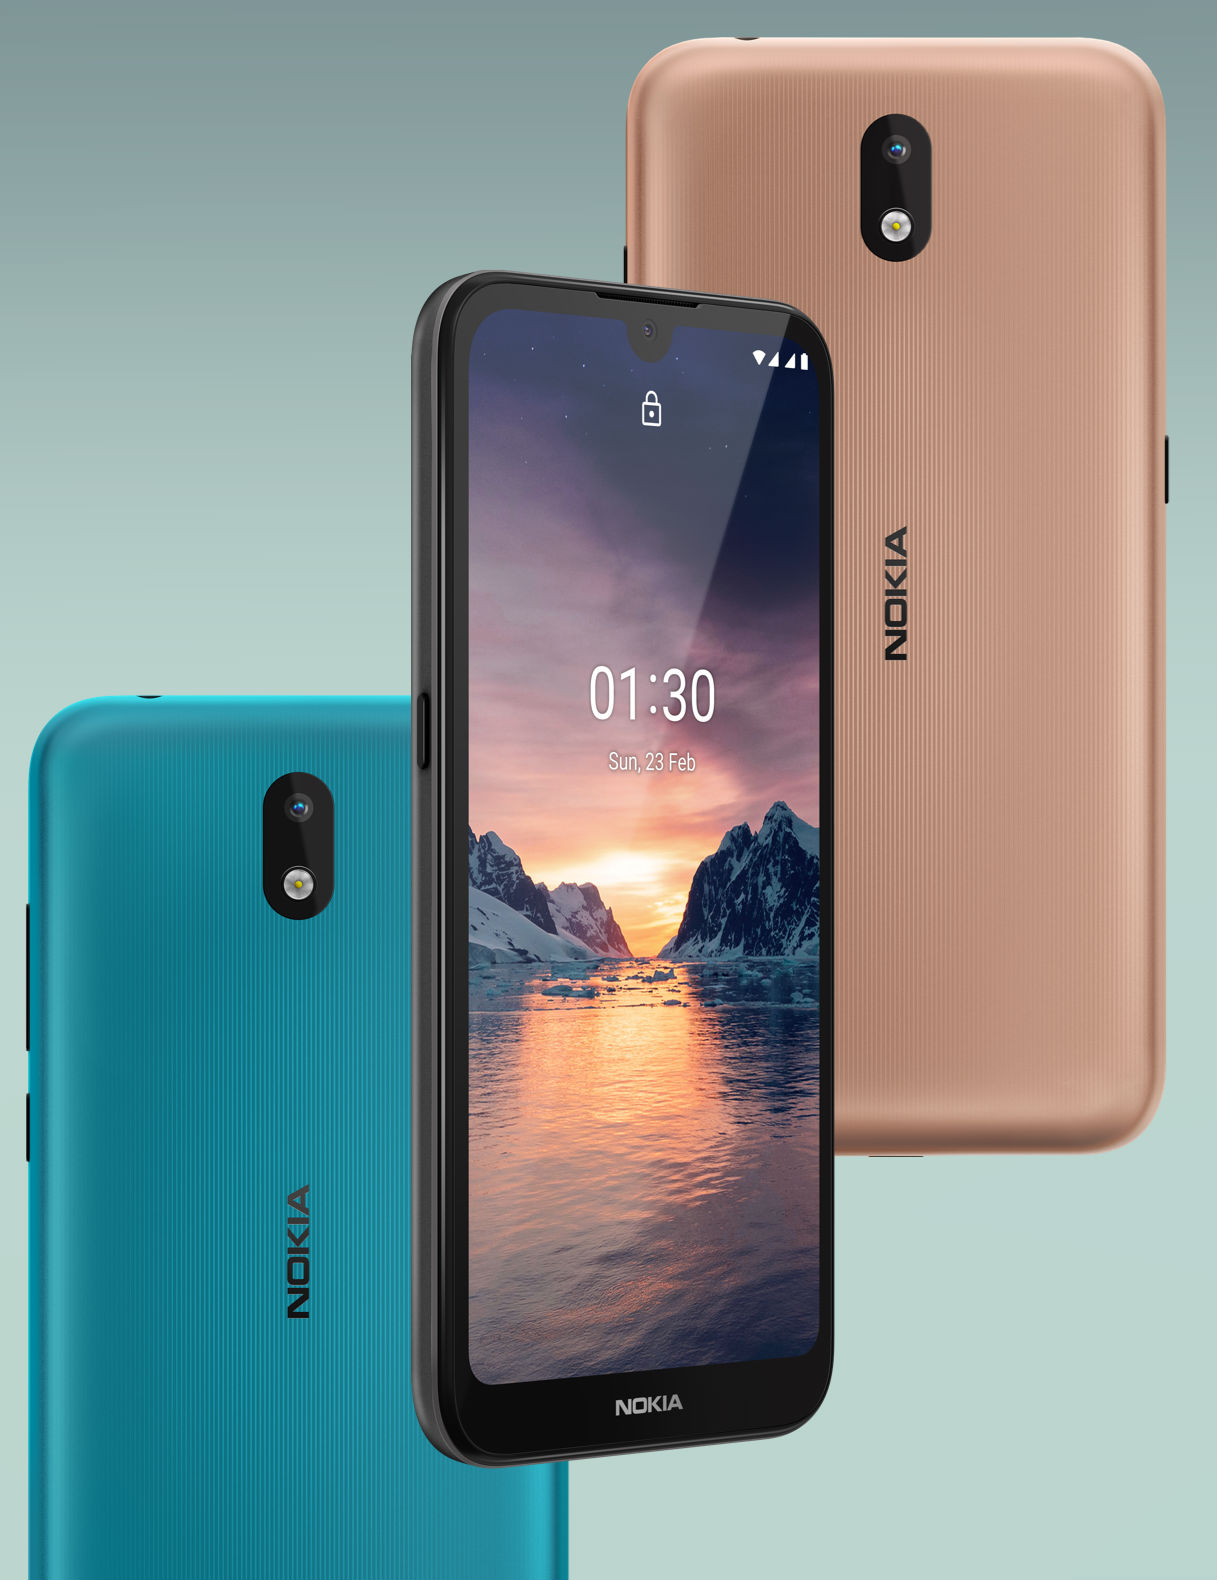 Overview of the Nokia 1.3 smartphone with key features